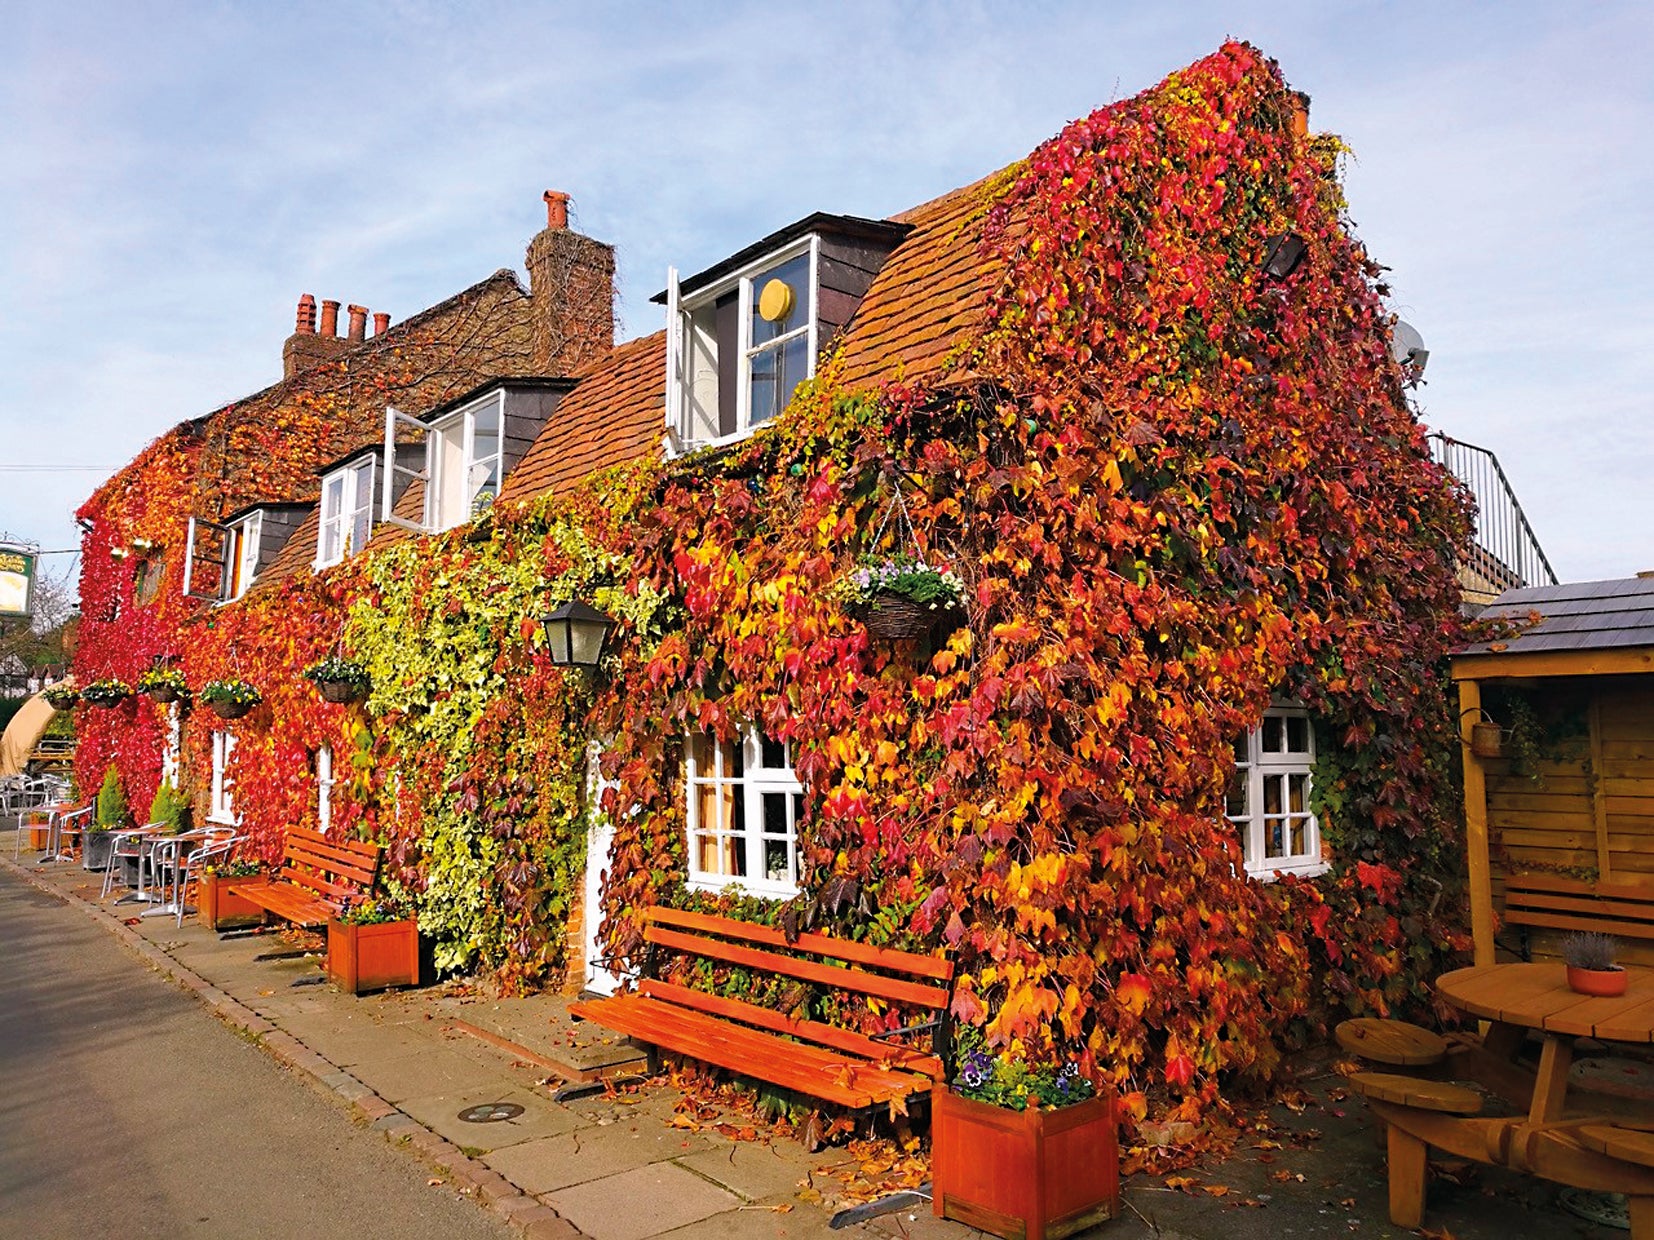 The ivy-covered facade of the The Bricklayers Arms, in Hertfordshire, described as having an "immaculate interior"